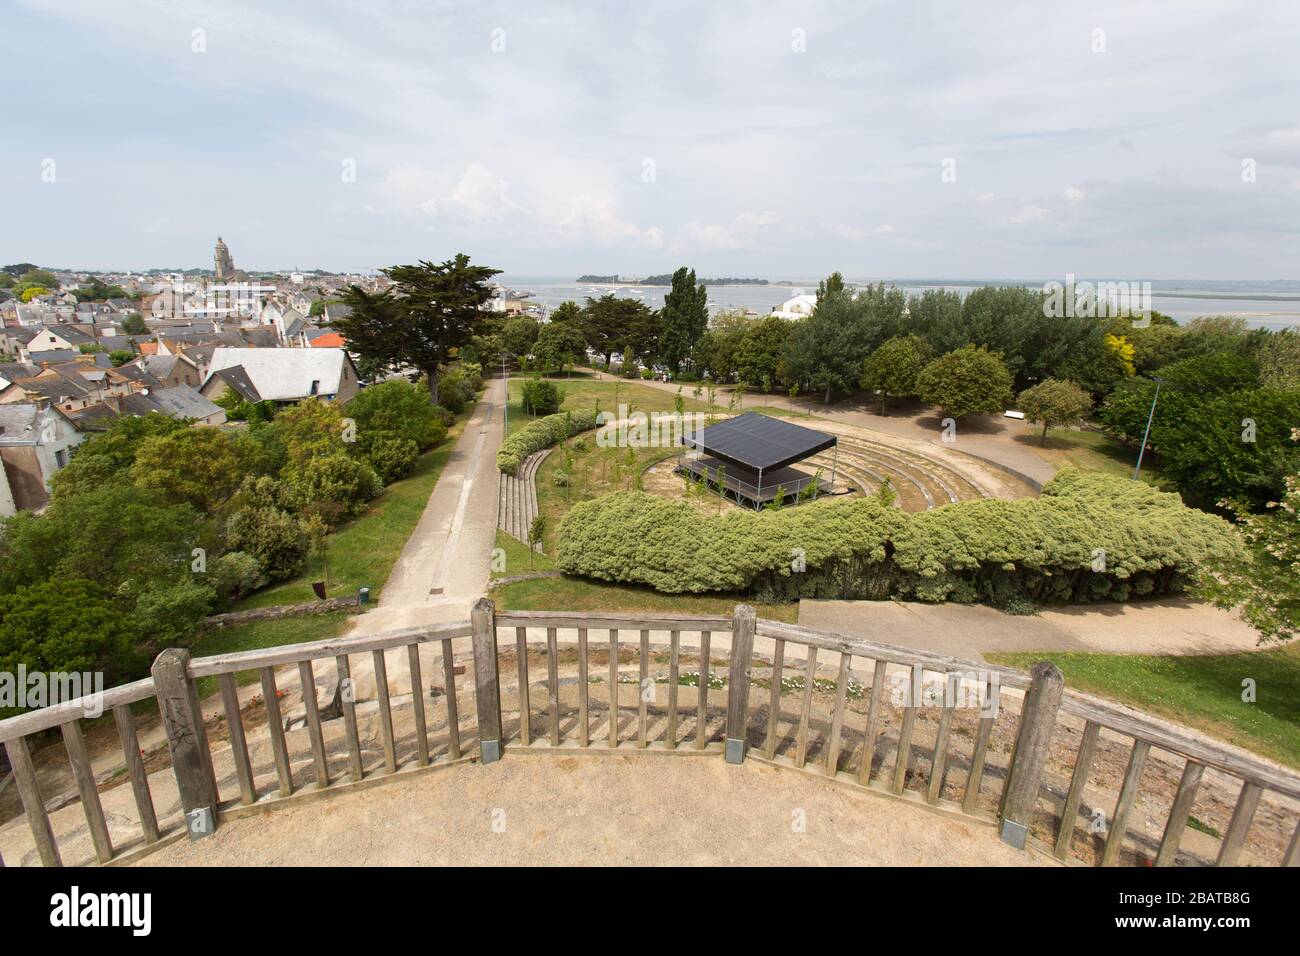 Le Croisic, France. Picturesque elevated view of Le Croisic’s public park, with the Pen Bron peninsula in the distant background. Stock Photo